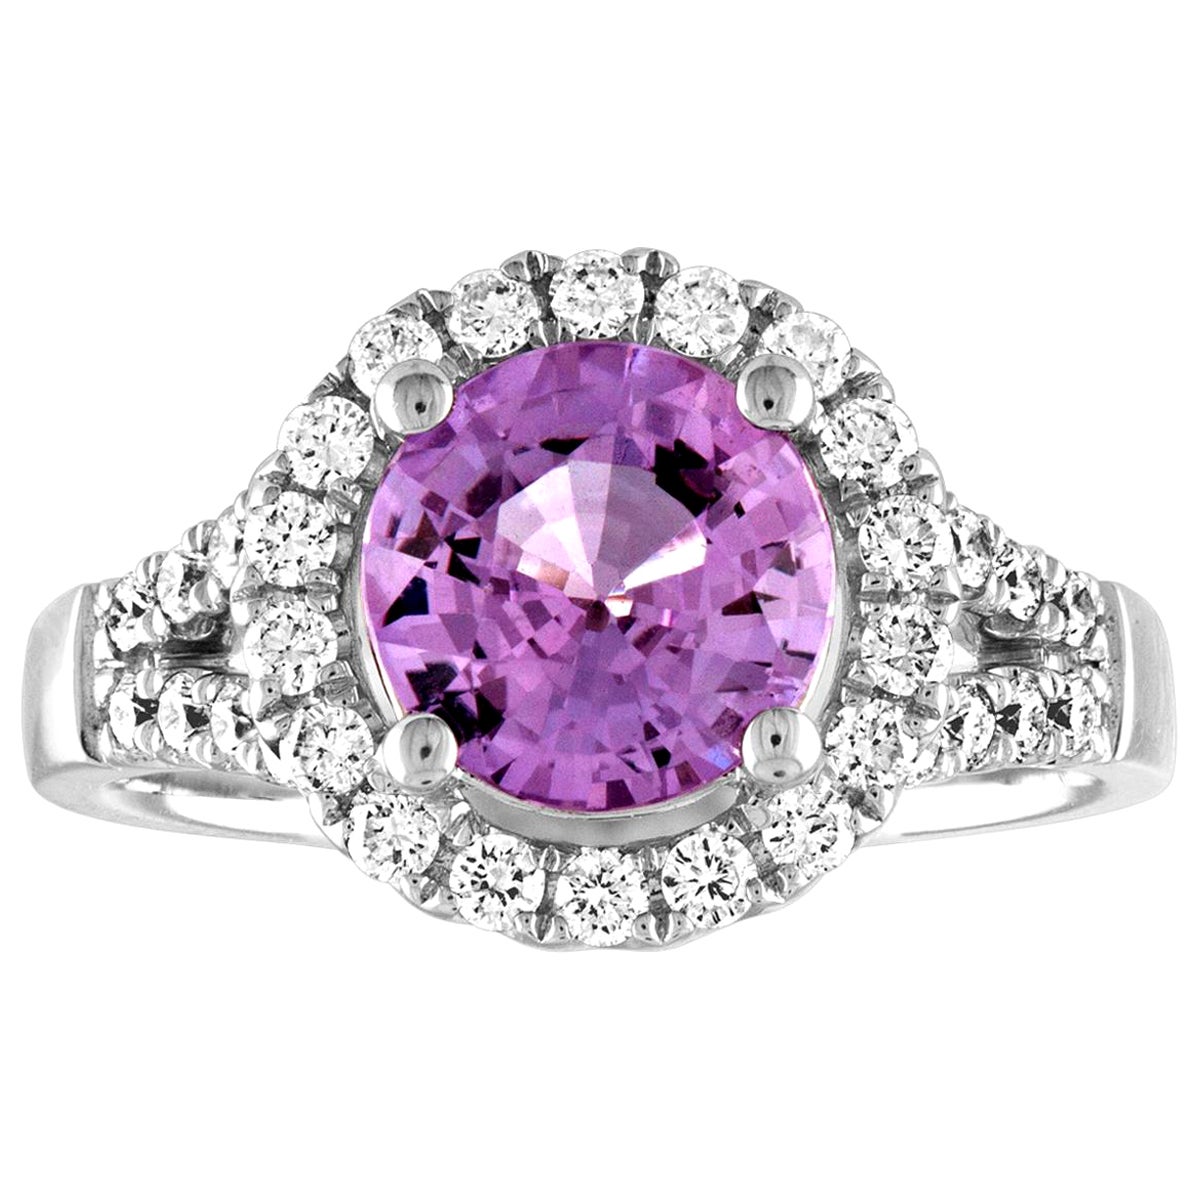 Certified No Heat 2.18 Carat Round Pink Sapphire Diamond Gold Ring For Sale